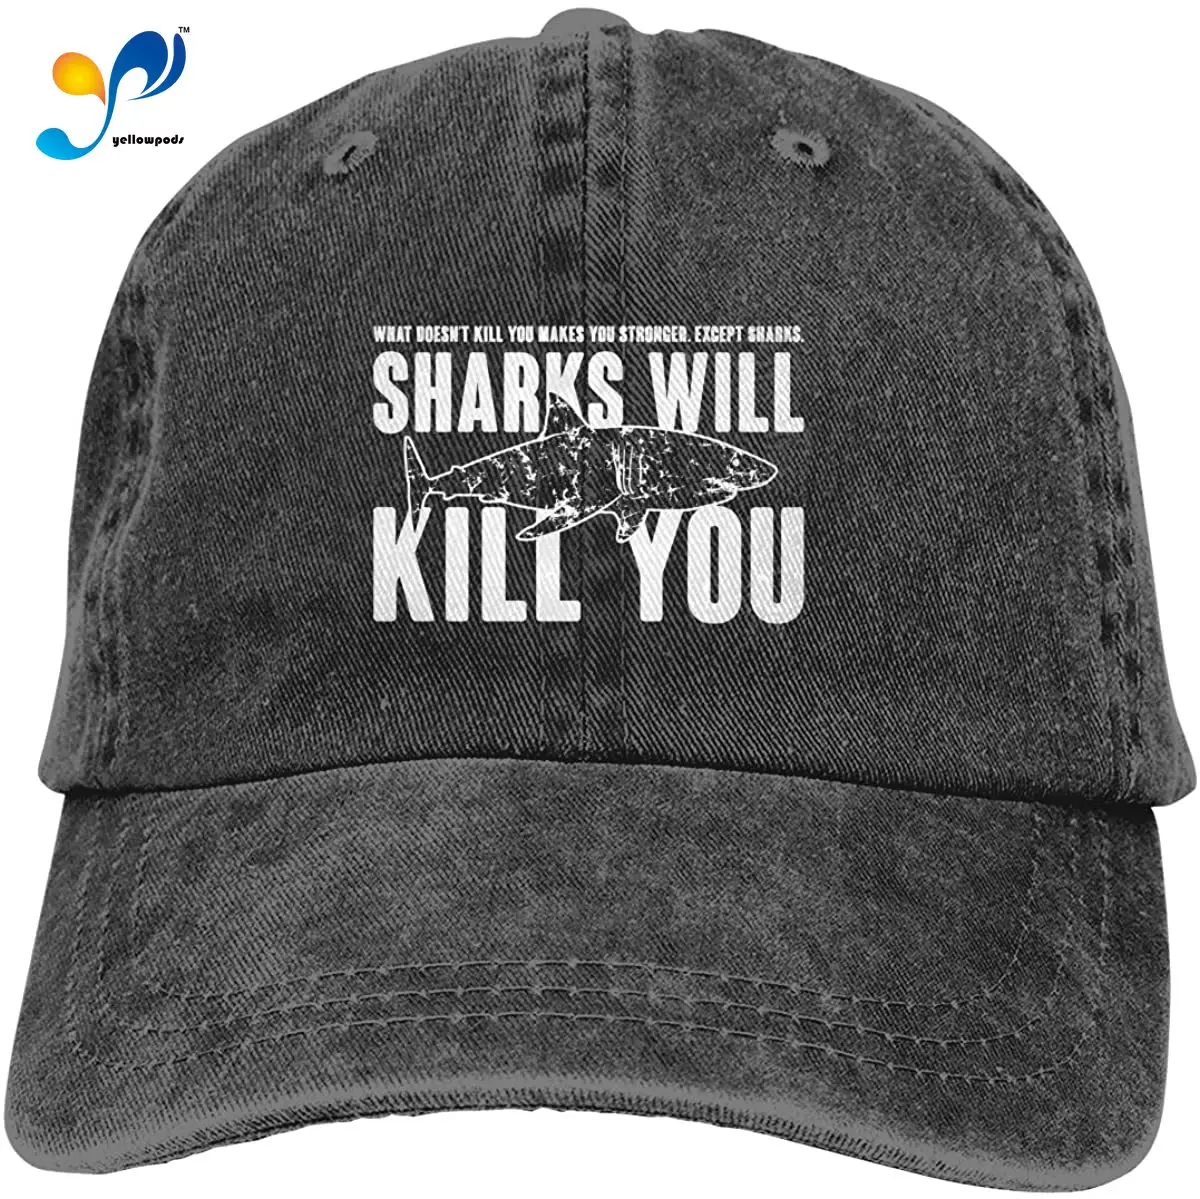 

Sharks Will Kill You Unisex Soft Casquette Cap Fashion Hat Vintage Adjustable Baseball Caps